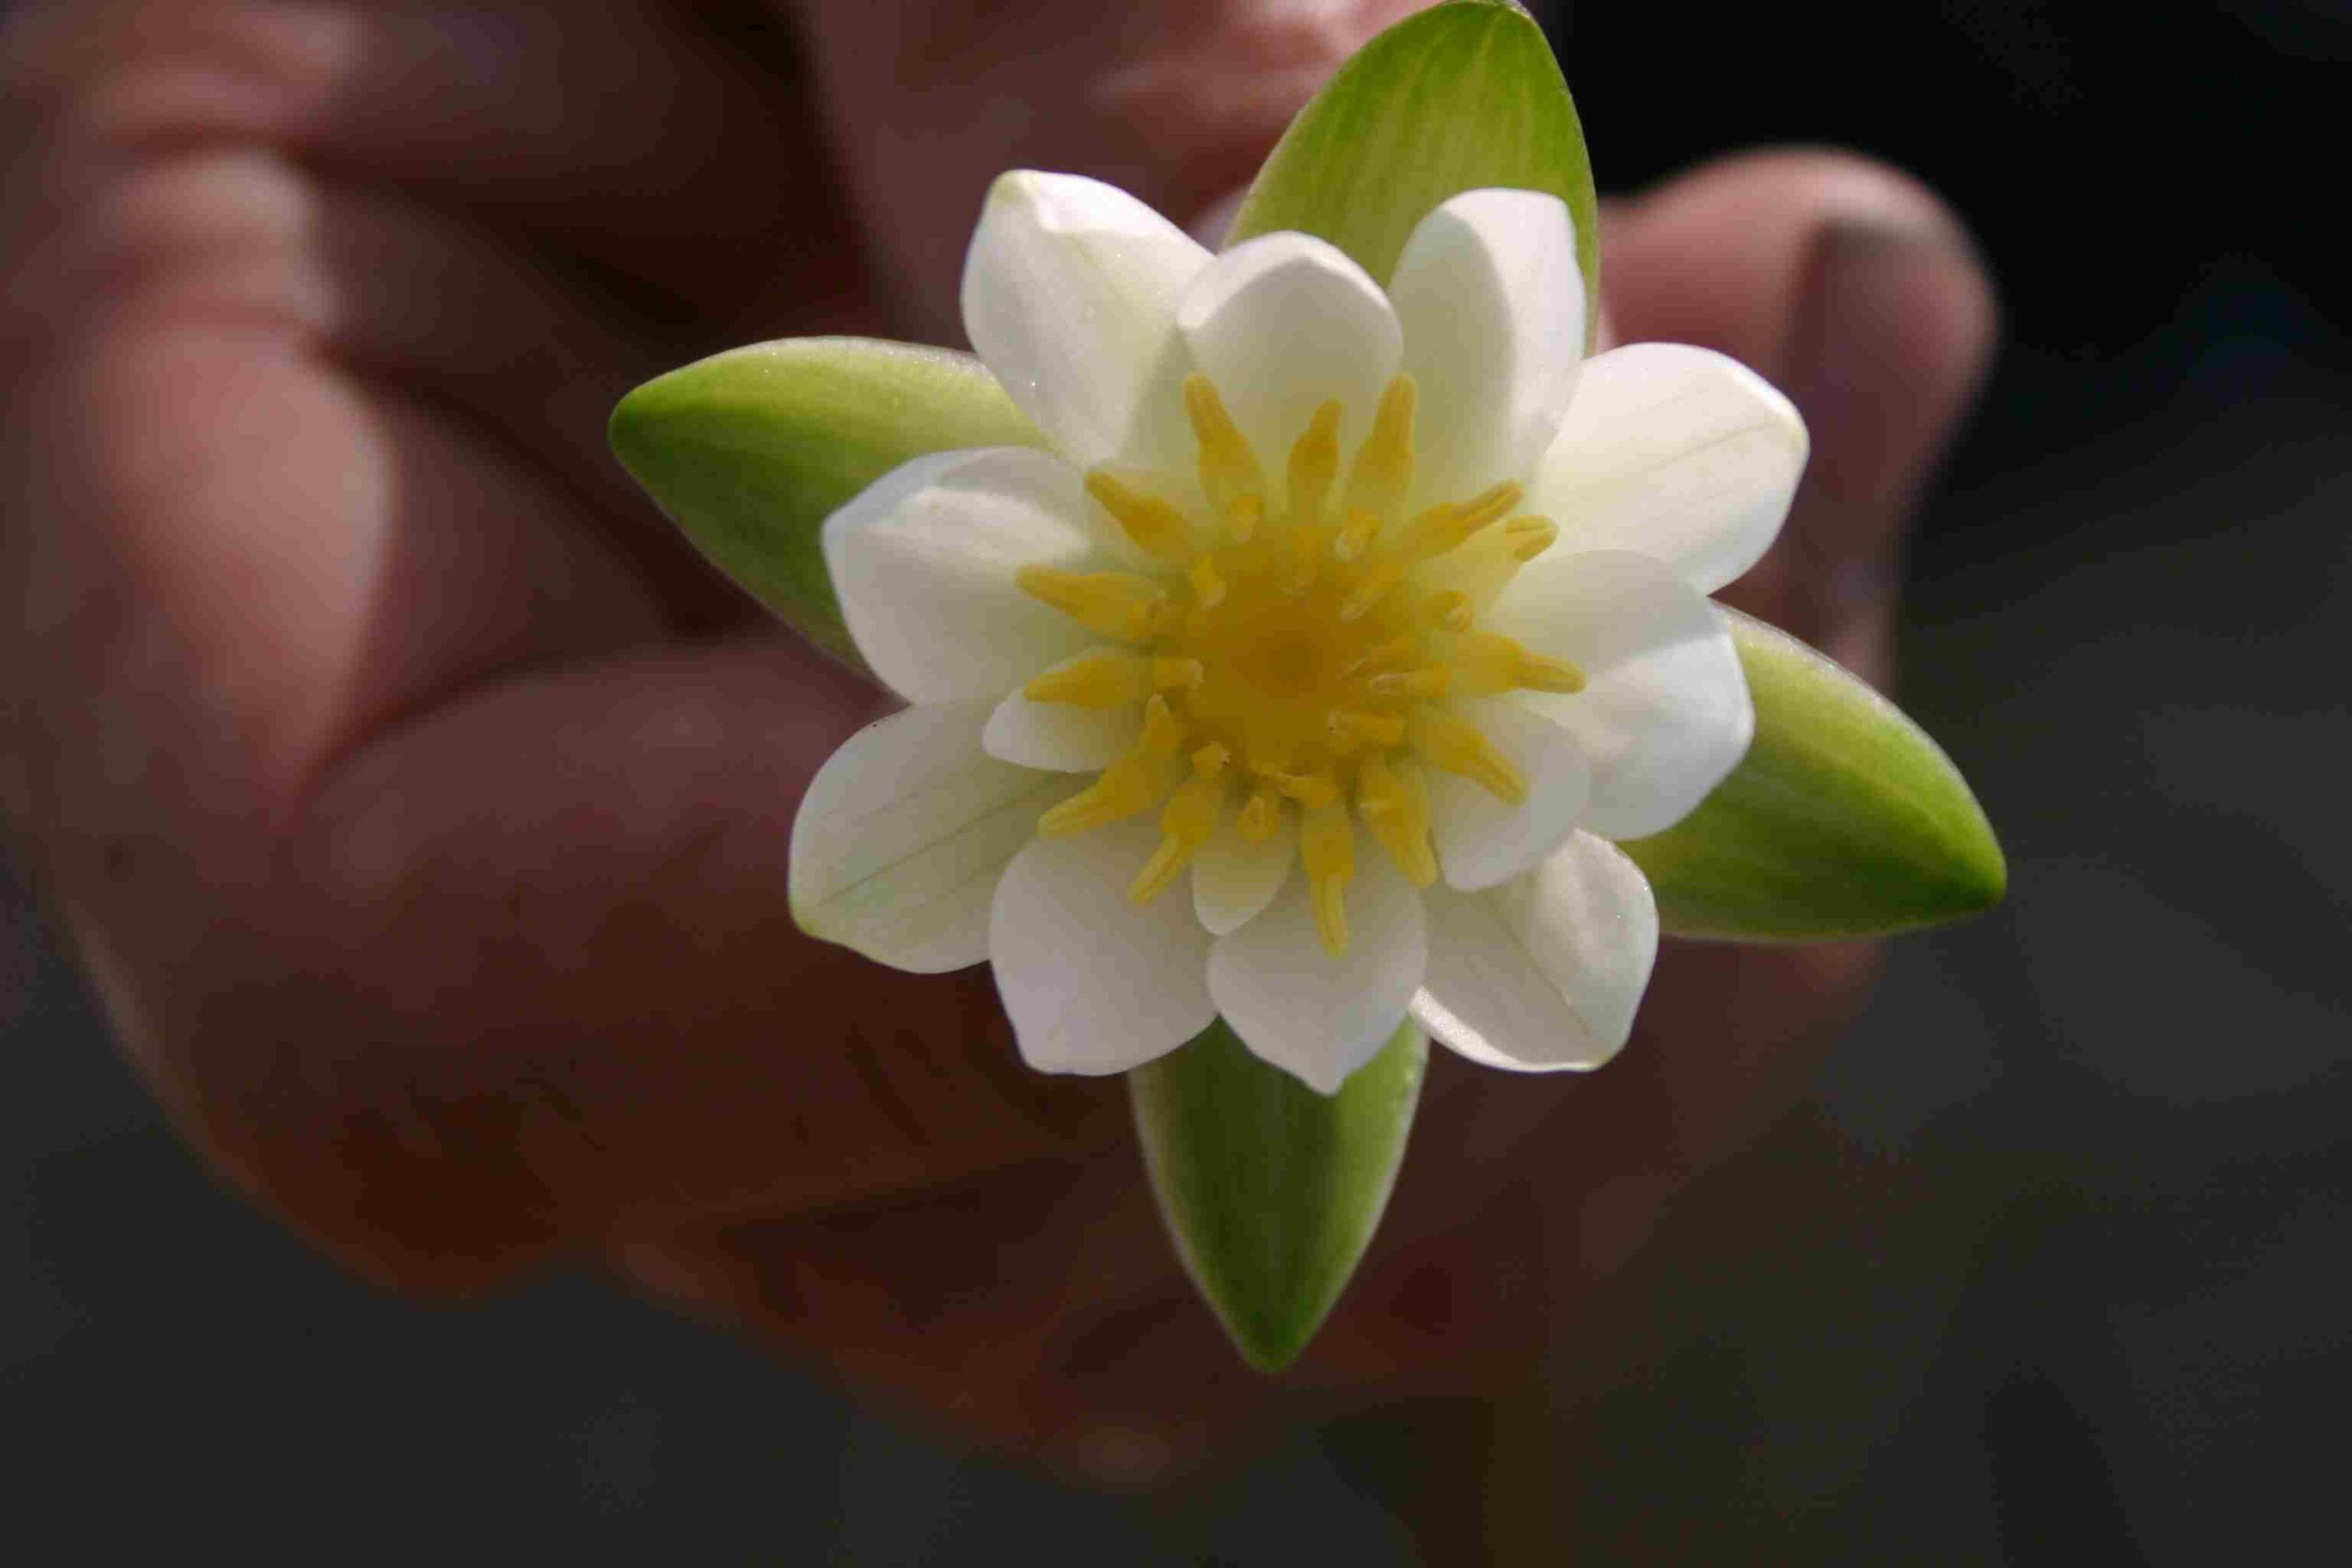 A close-up of a white water lily with a yellow centre, being held up to the camera lens.